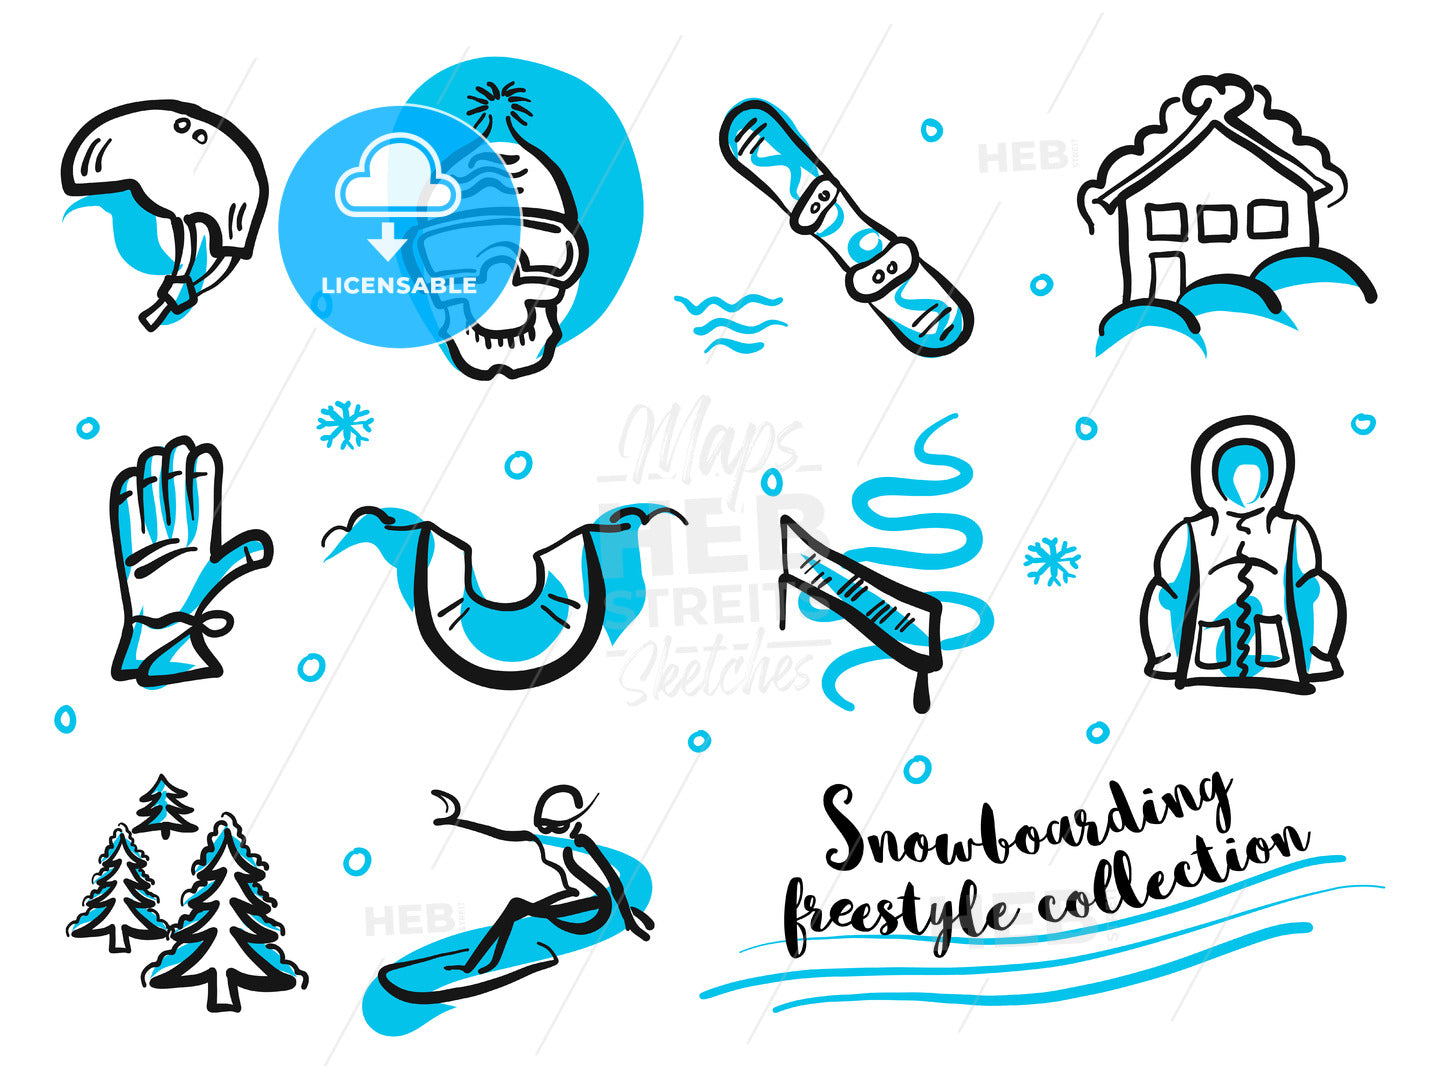 Snowboard freestyle collection icon set – instant download